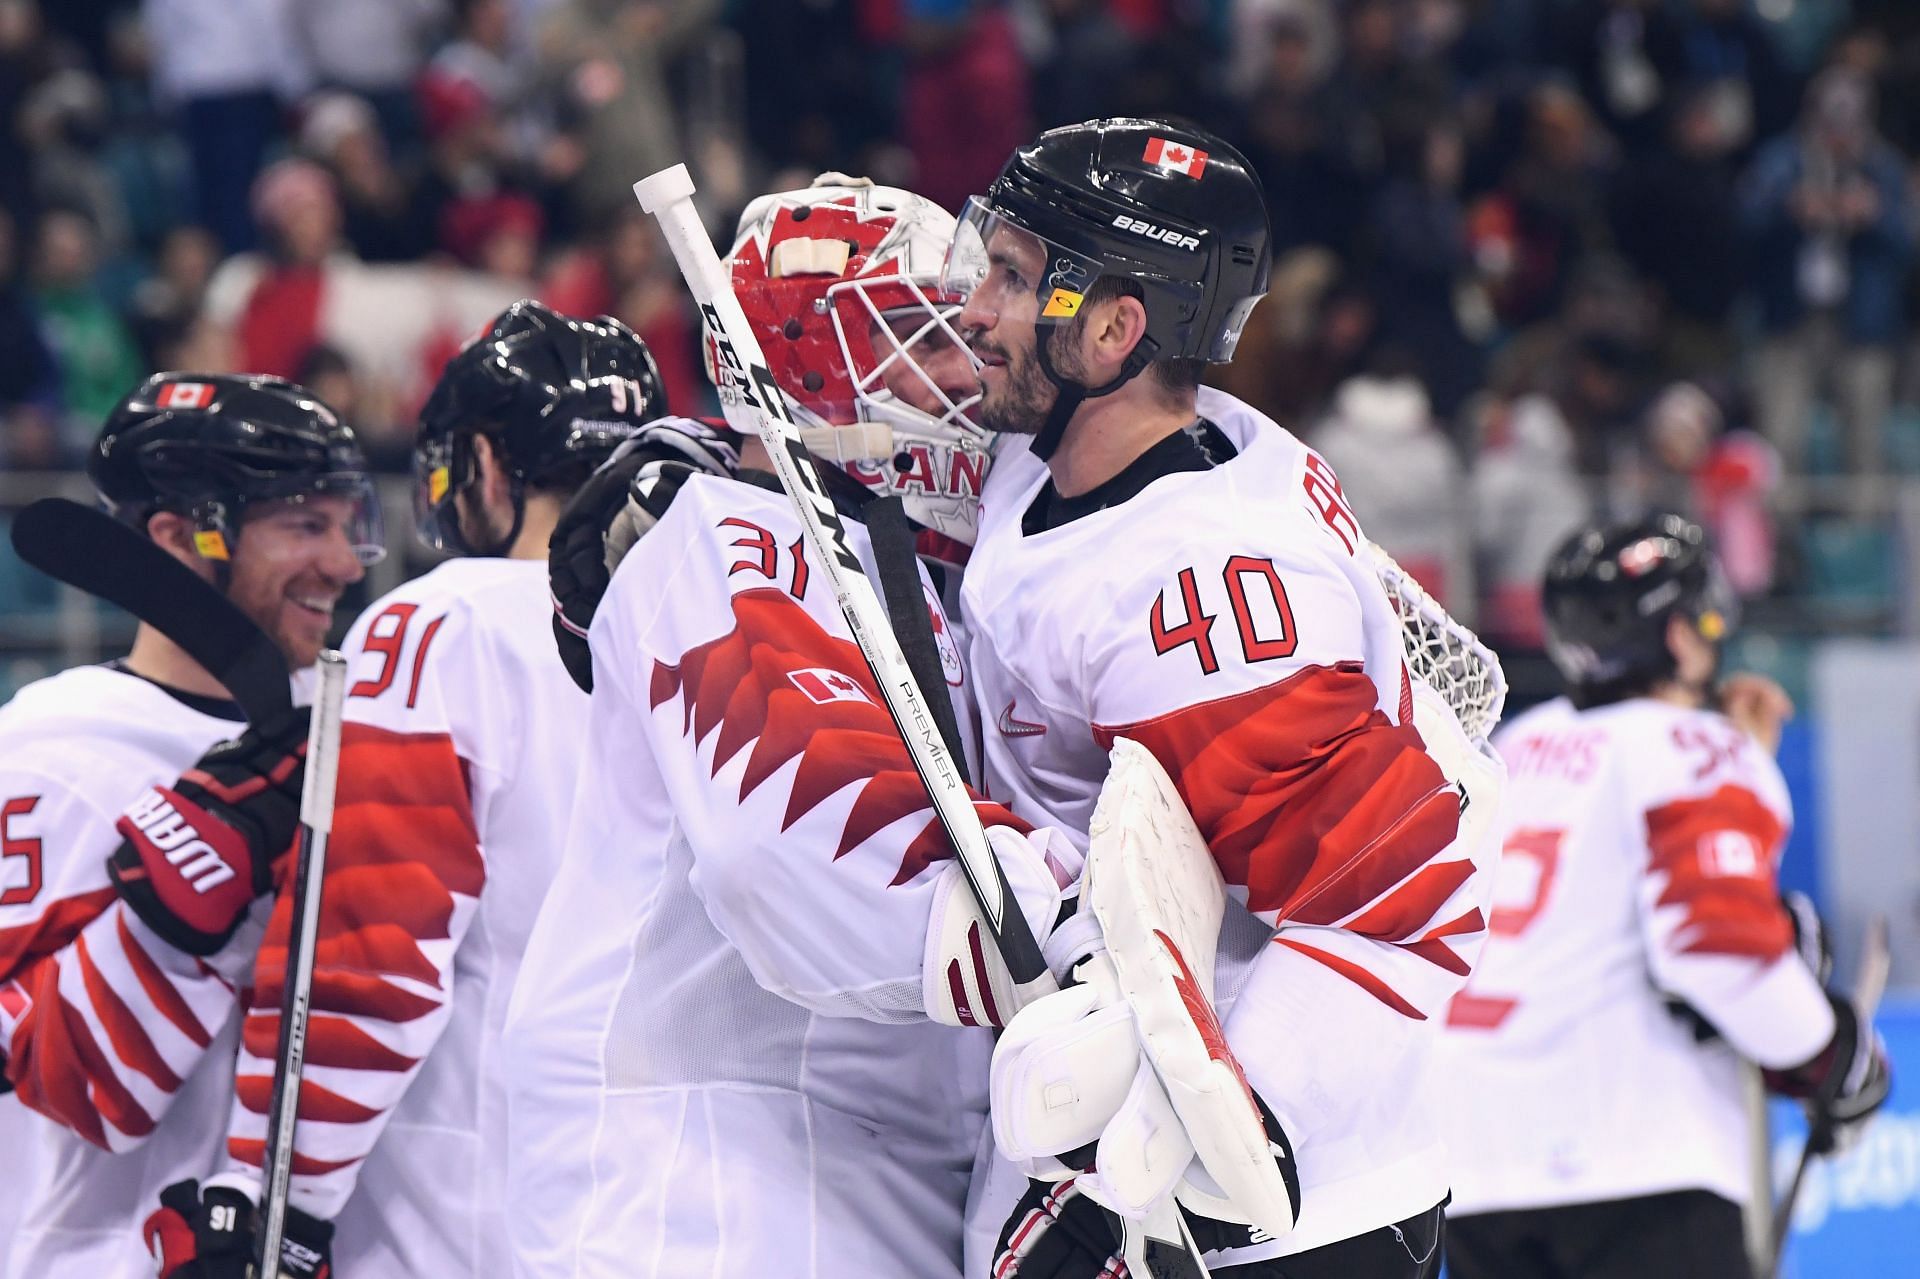 Canada vs Czech Republic Group B How to watch, live streaming, channel list, and more